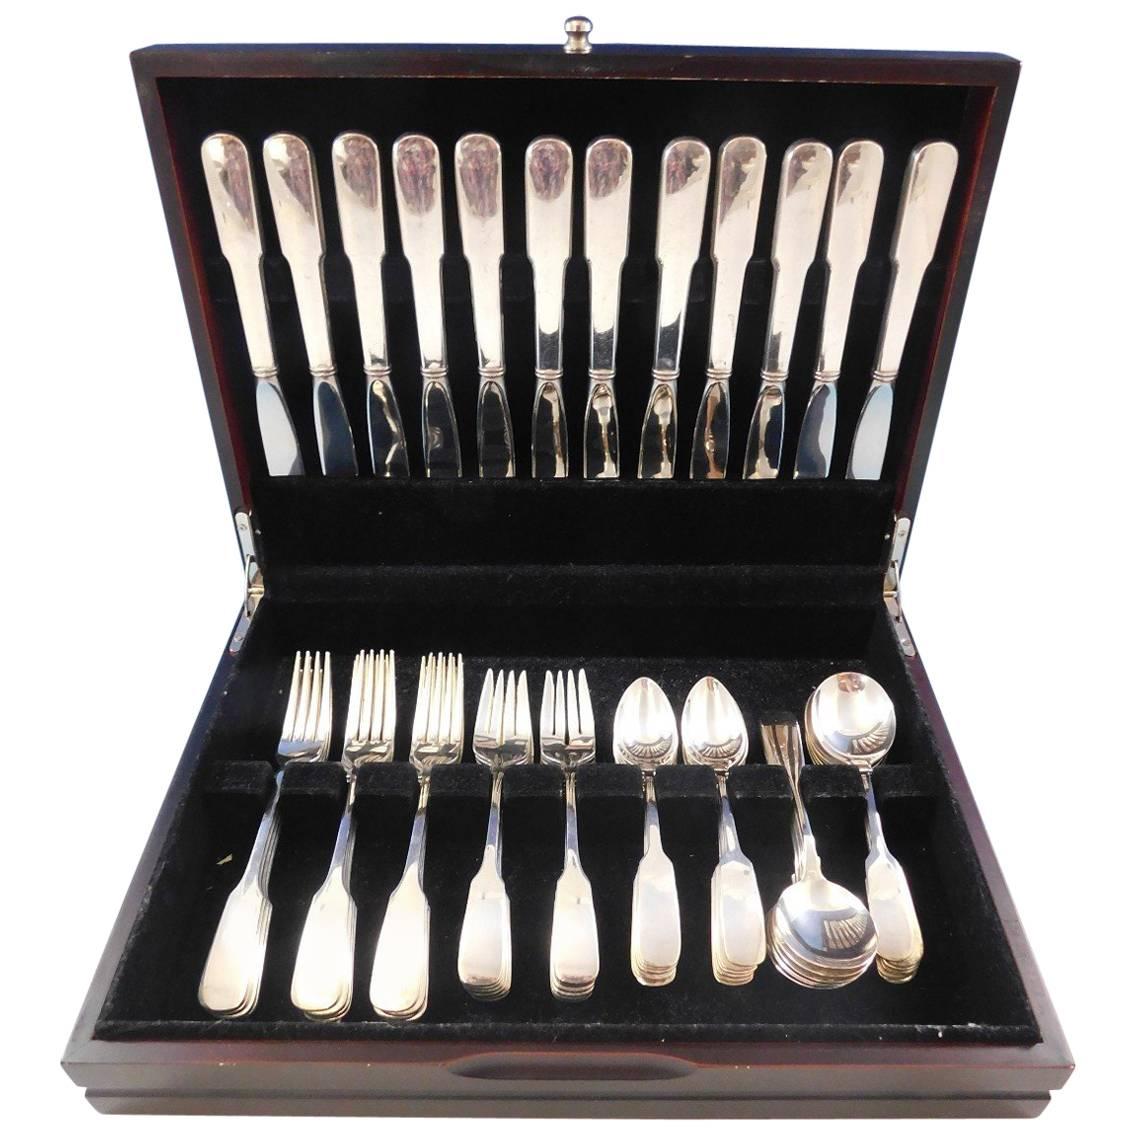 Place Size Old English Tipt by Gorham sterling silver flatware set of 60 pieces. This set includes:

12 place size knives, 9 1/4